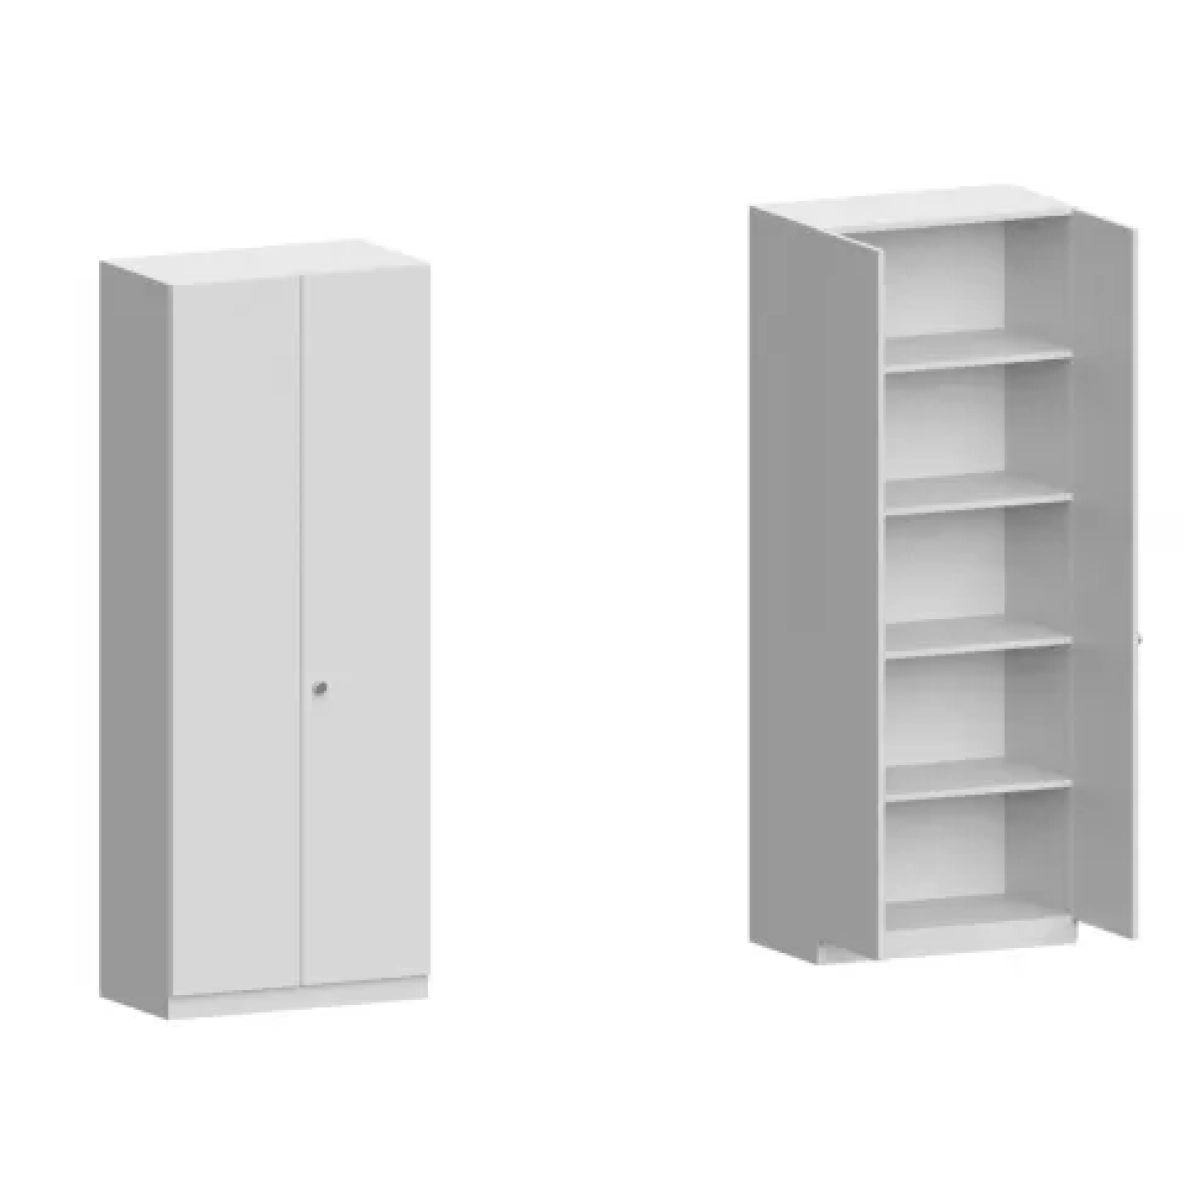 ESD tall cabinets with hinged doors and high shelves